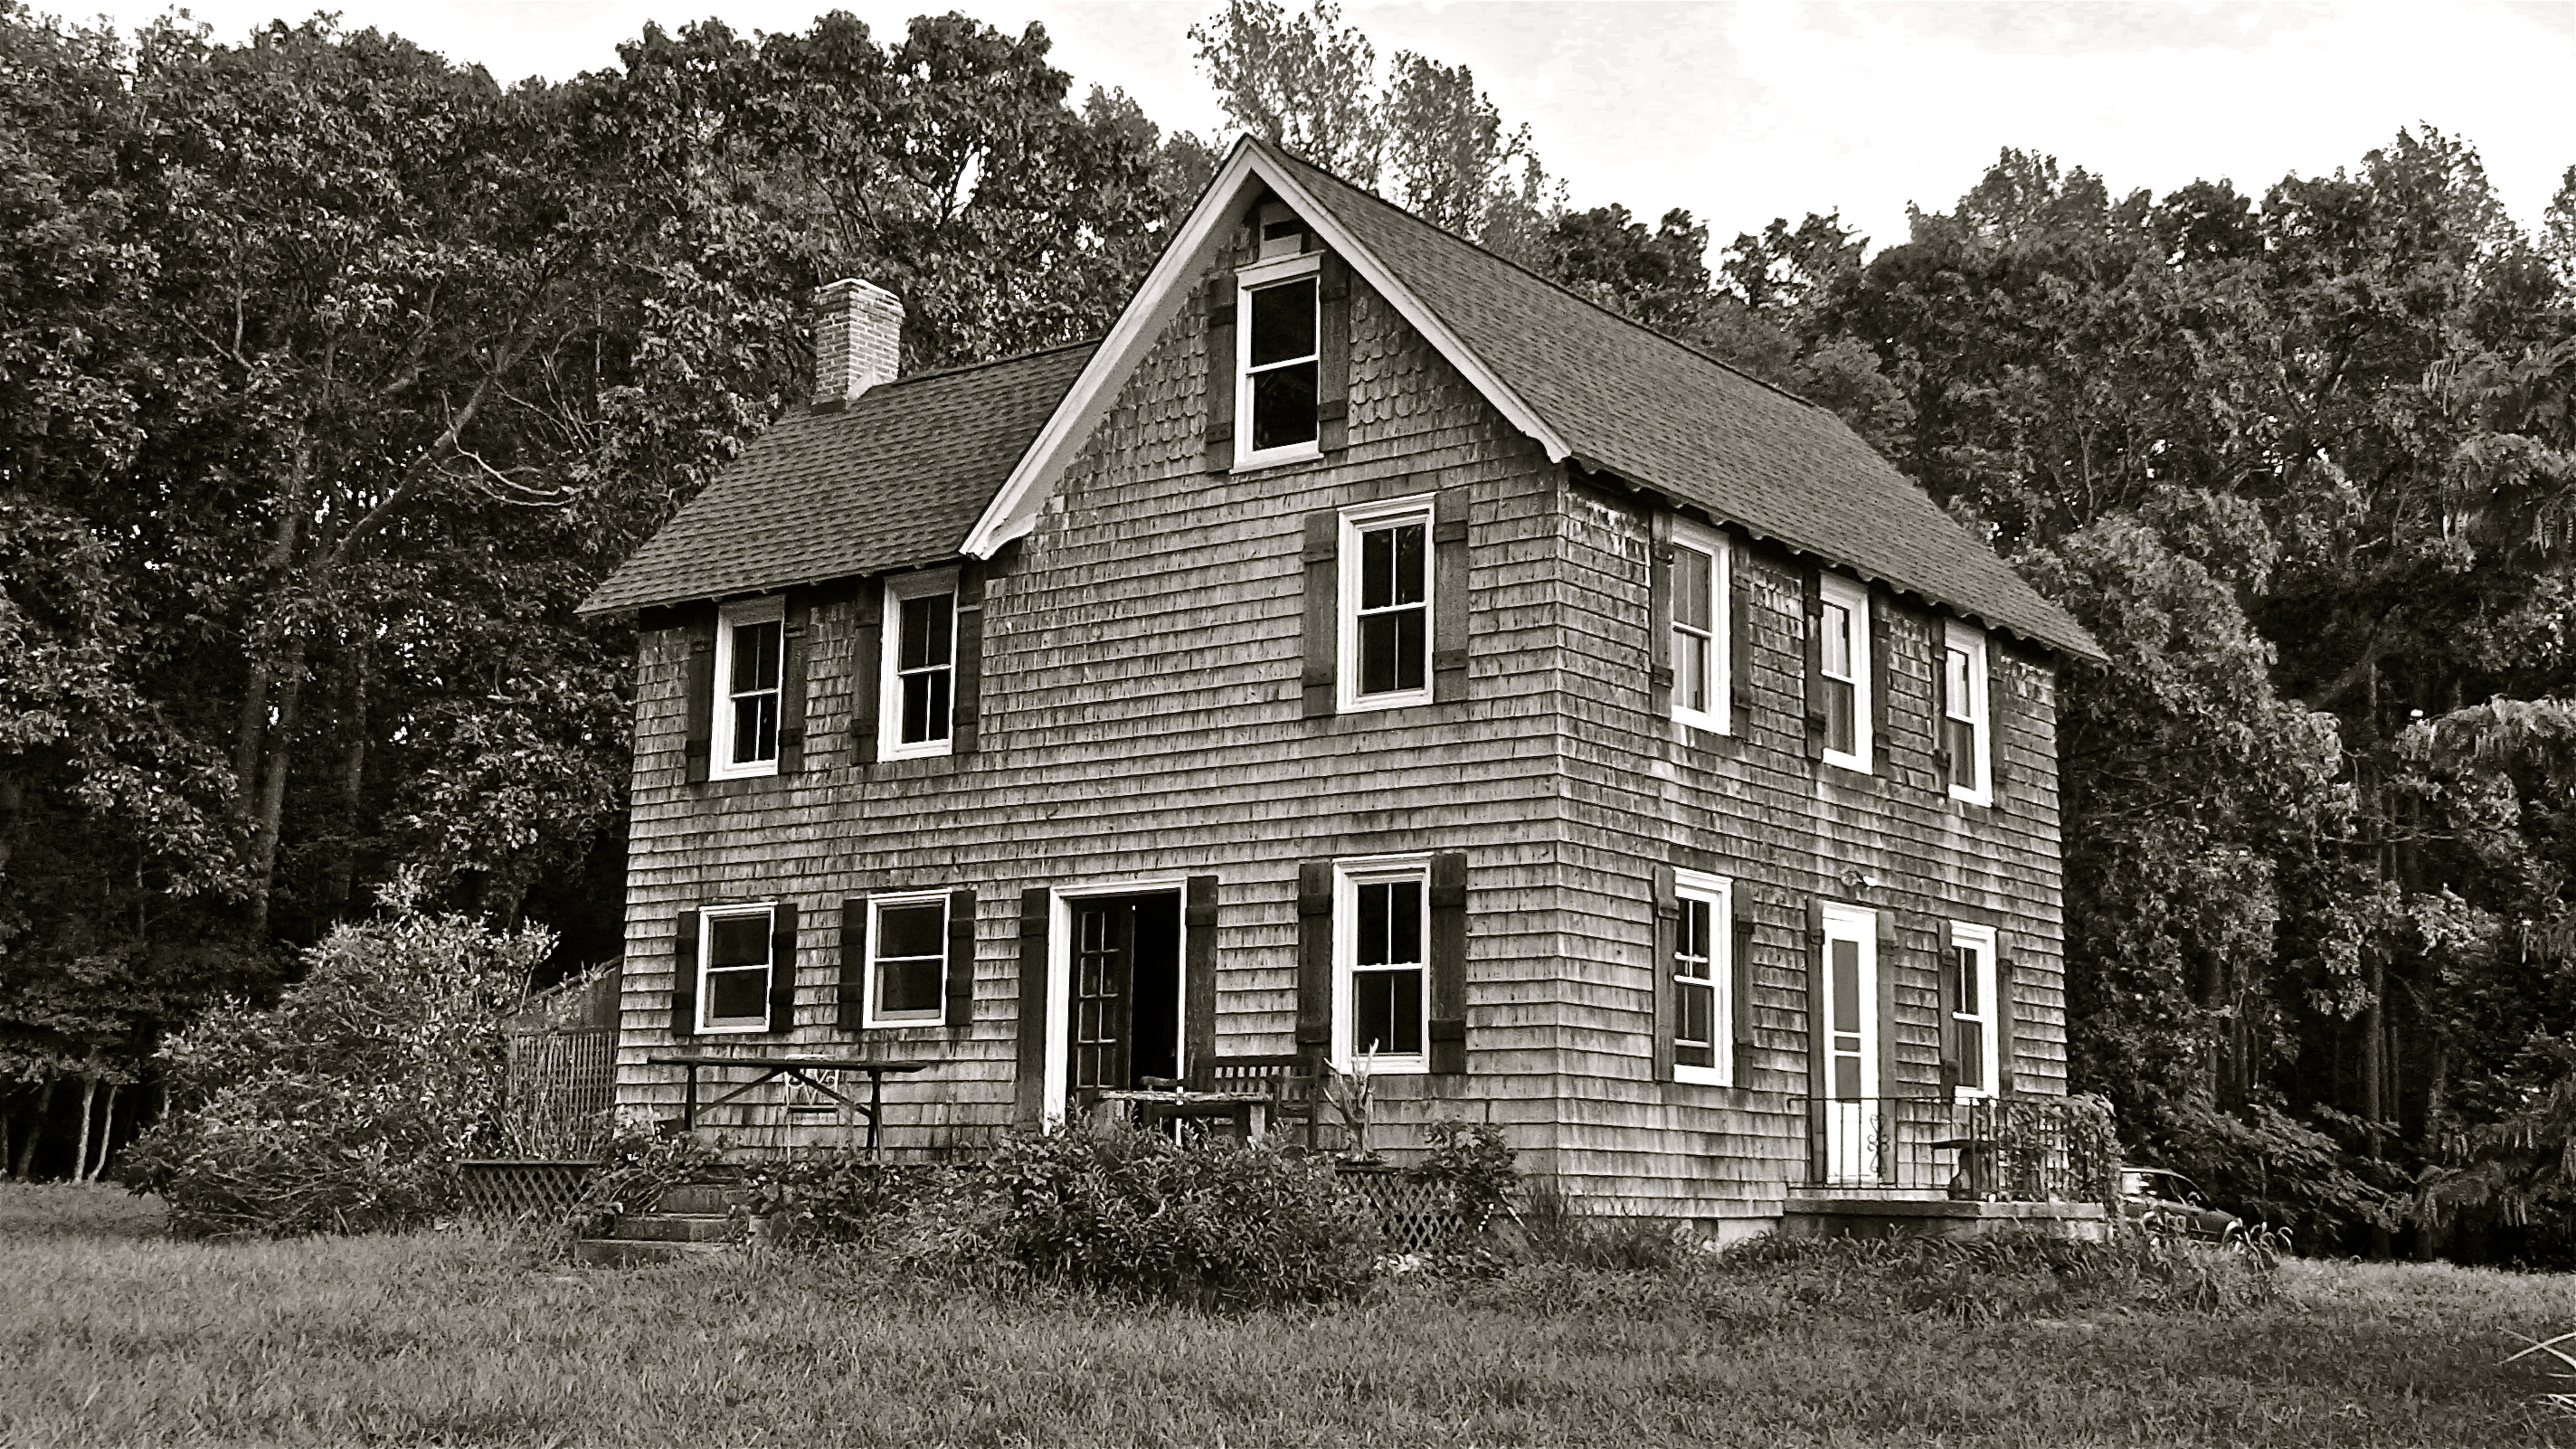 This Ole House -1910